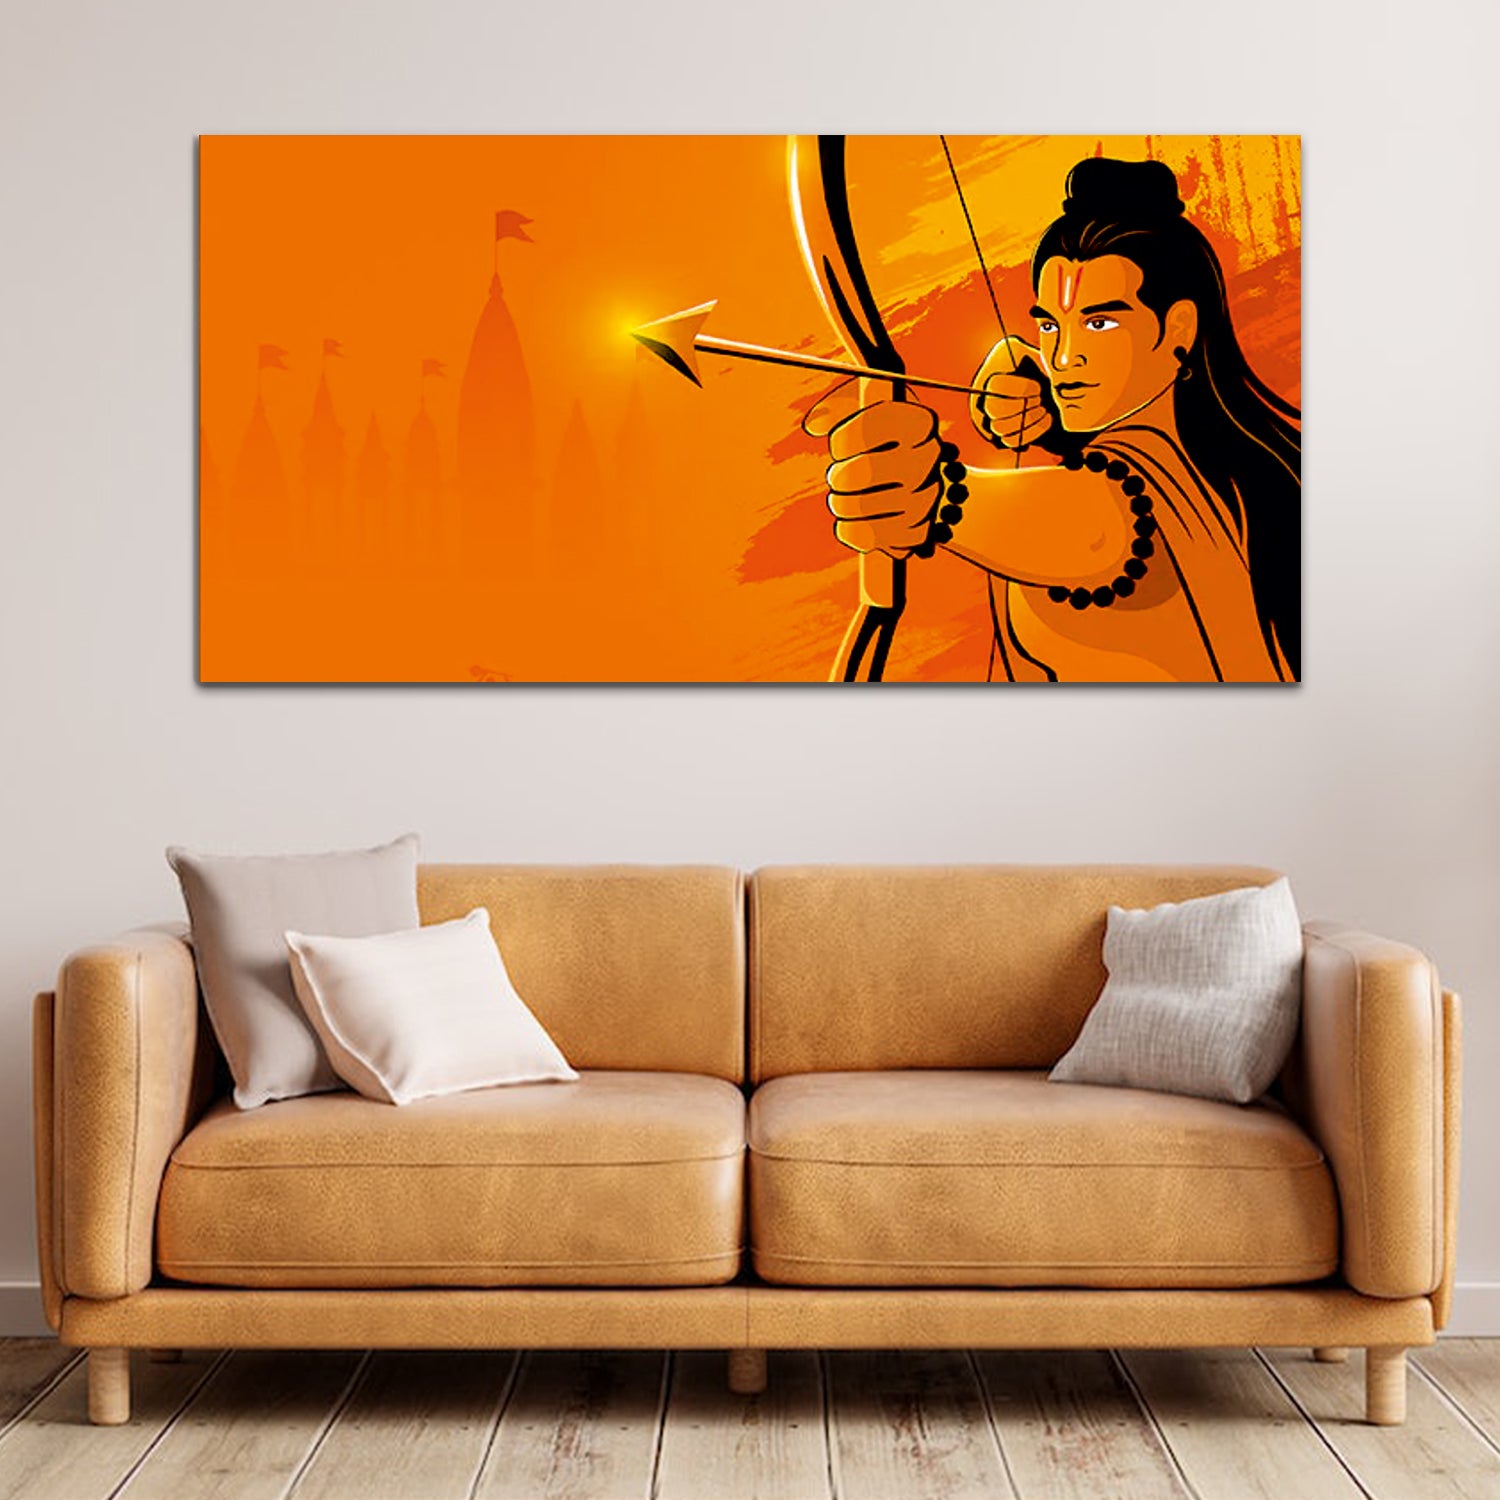 Shree Ram with Tample Canvas Wall Painting